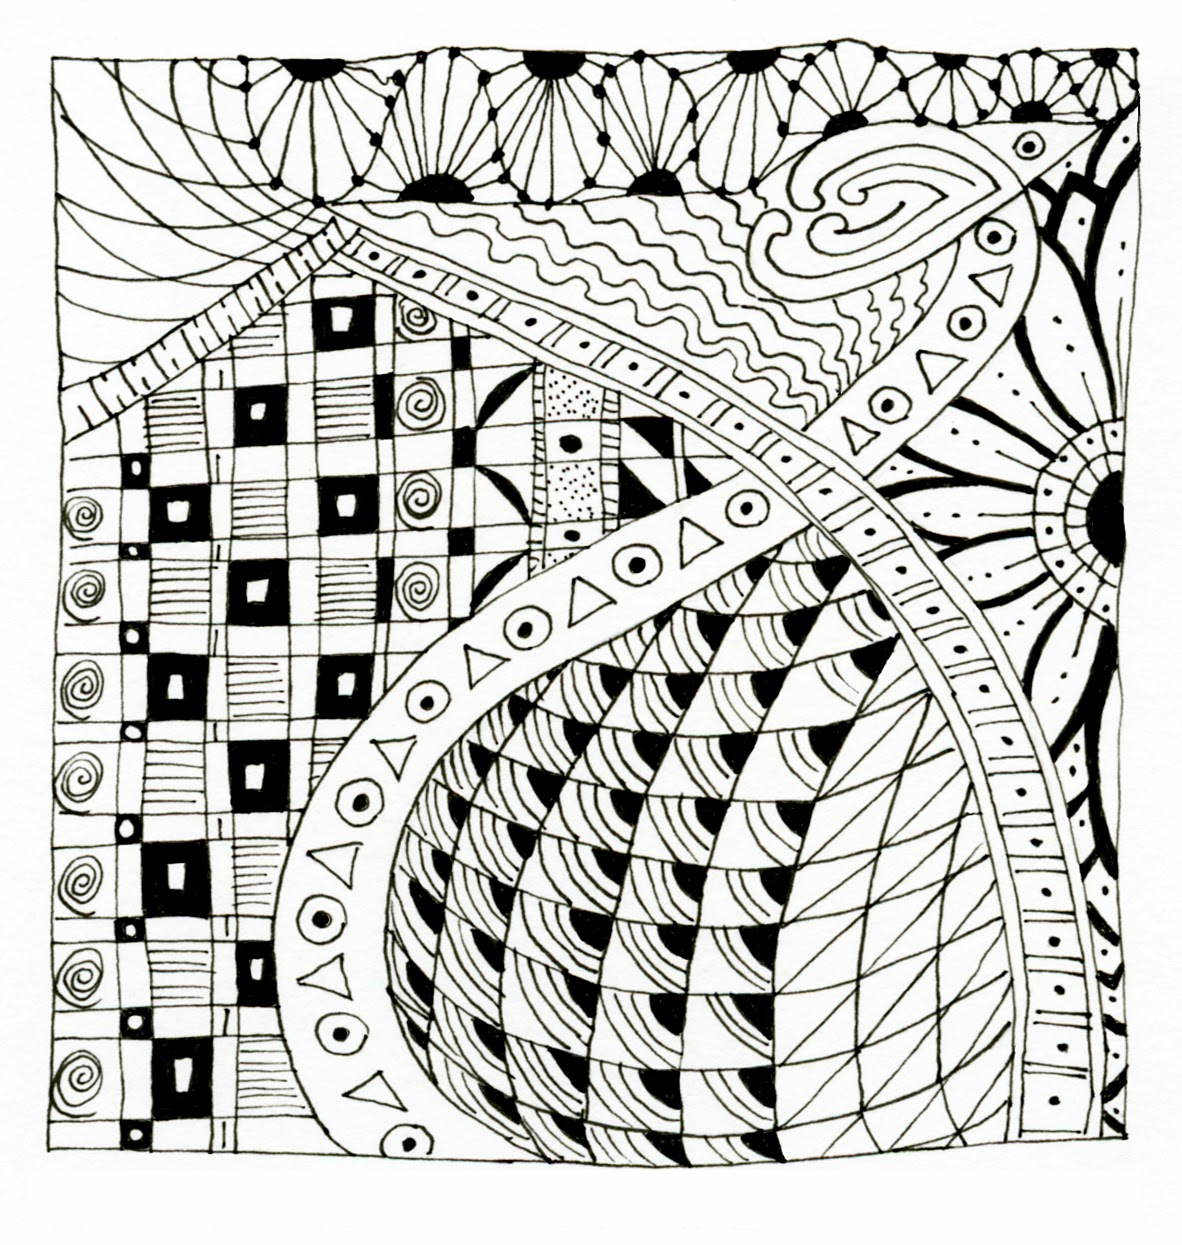 Image Maker: A free Zentangle Workshop and 2 art classes